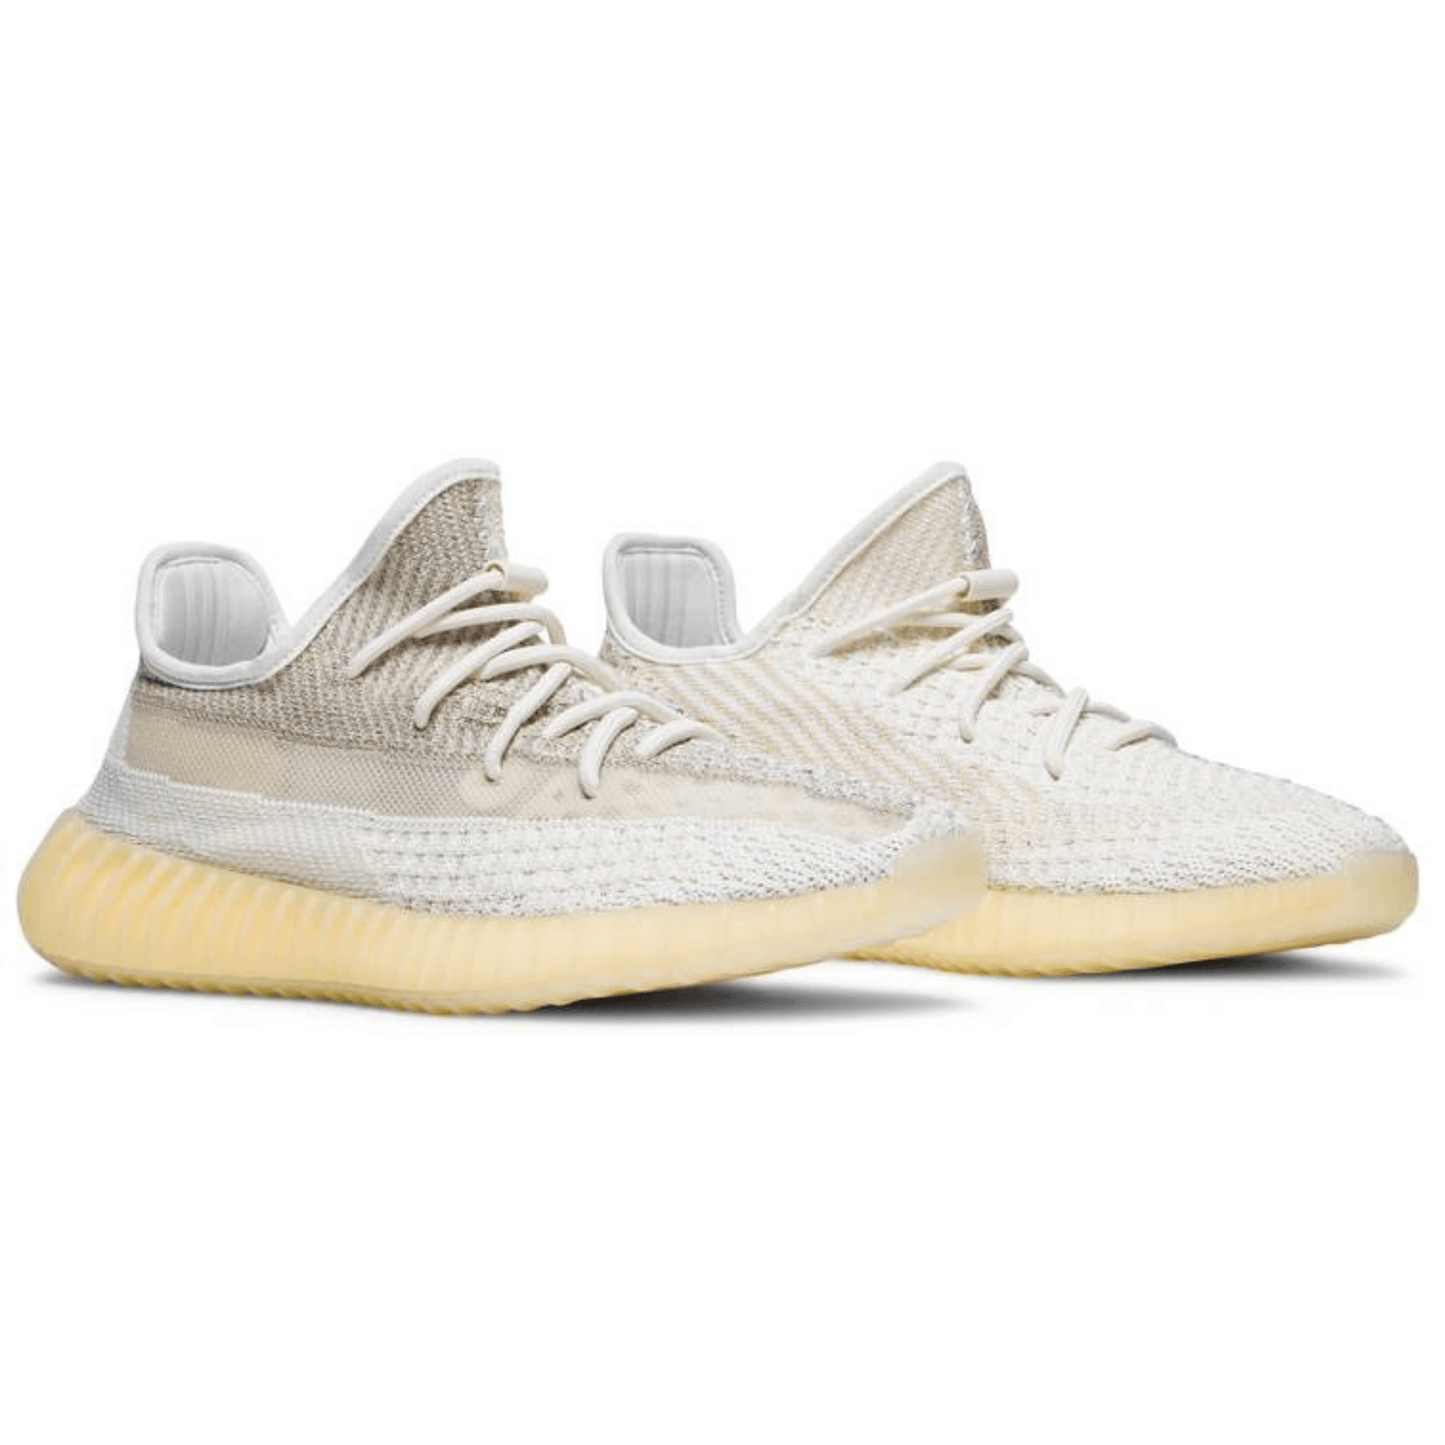 Yeezy Boost 350 V2 'Natural' - FRESNEAKERS